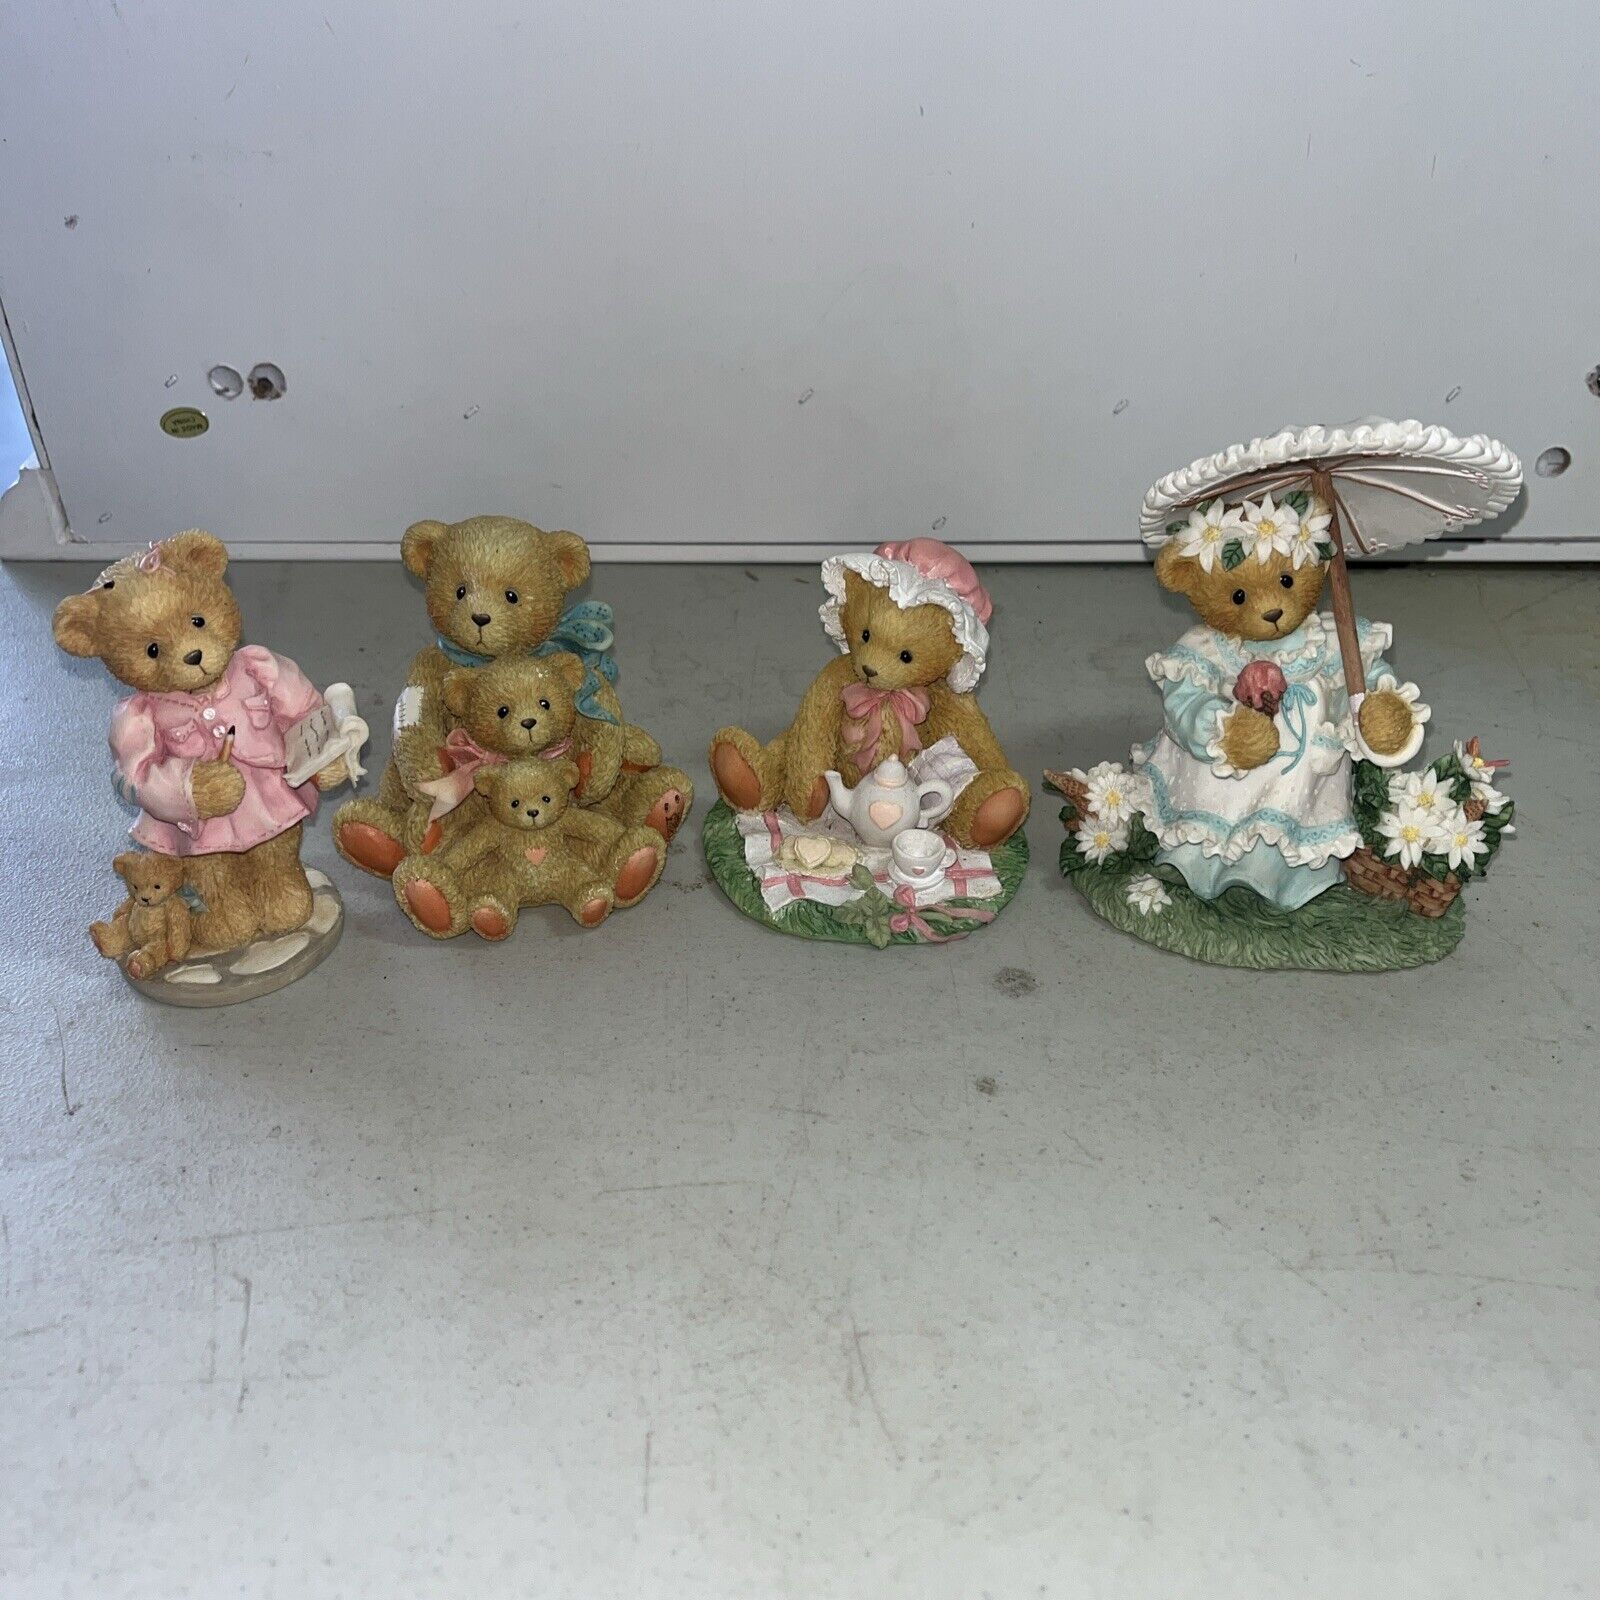 Lot Of 4 Cherished Teddies Figurines Collectible Bears Kimberly Marie Hilary Tri